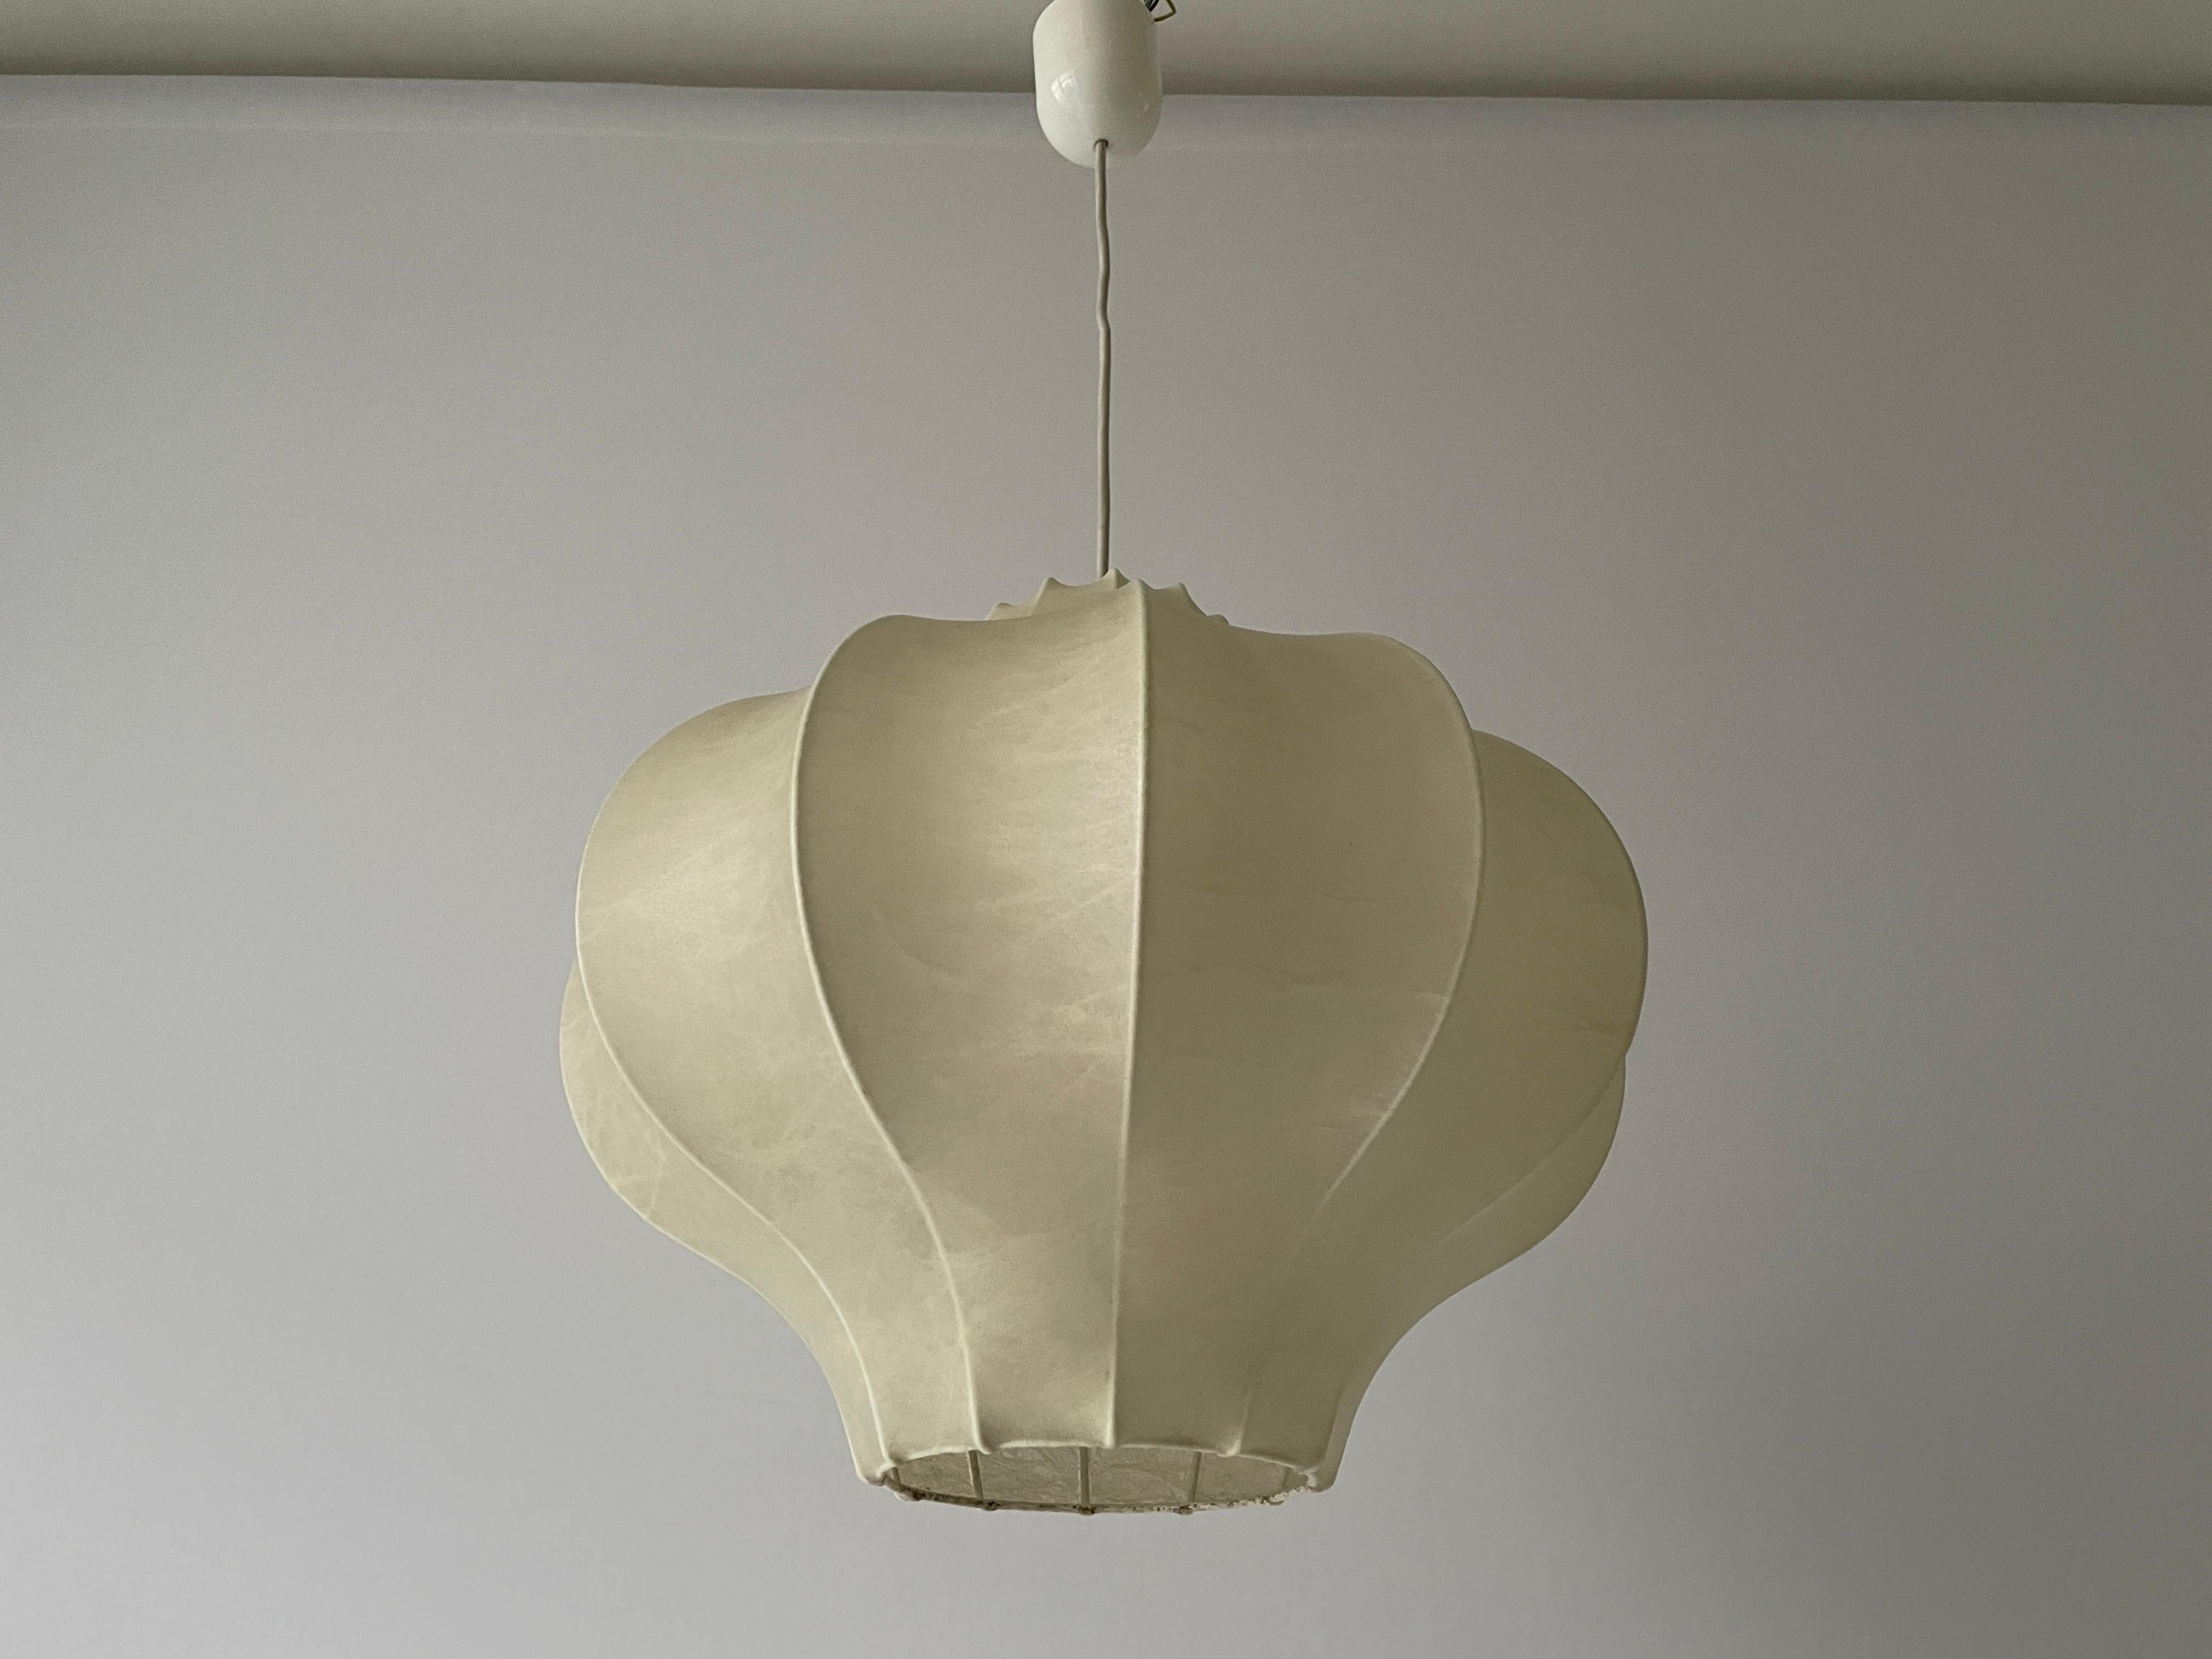 Cocoon Pendant Lamp by Goldkant, 1960s, Germany

Lampshade is in very good vintage condition.

This lamp works with E27 light bulbs. 
Wired and suitable to use with 220V and 110V for all countries.

Measurements:
Height: 75 cm
Shade diameter and